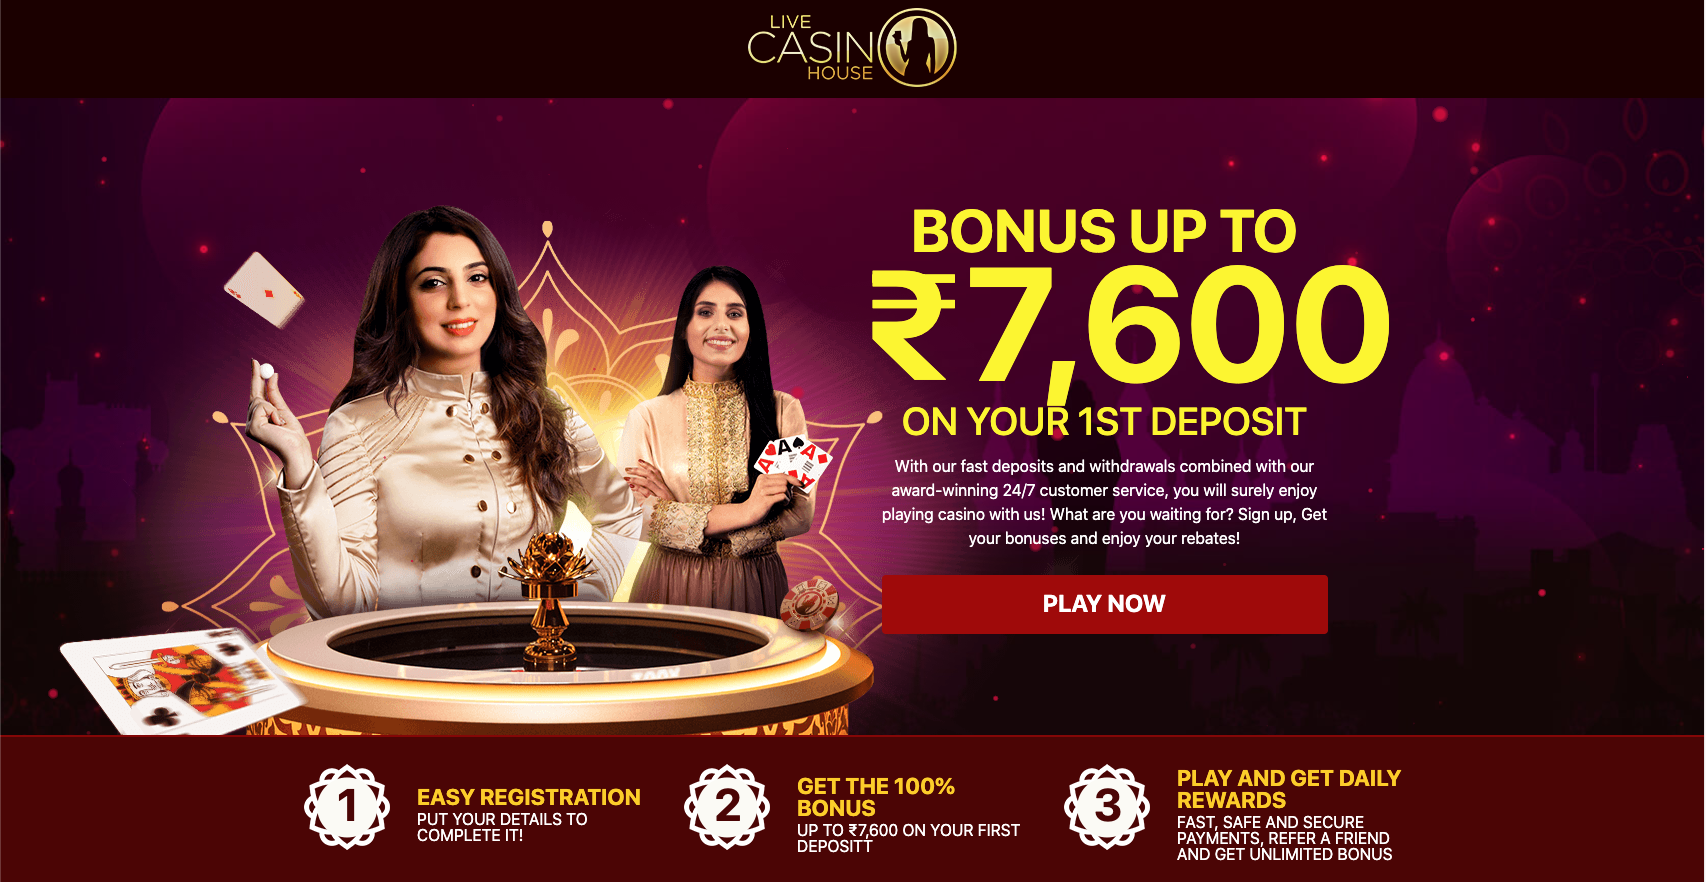 Indian frontpage of Live Casino House